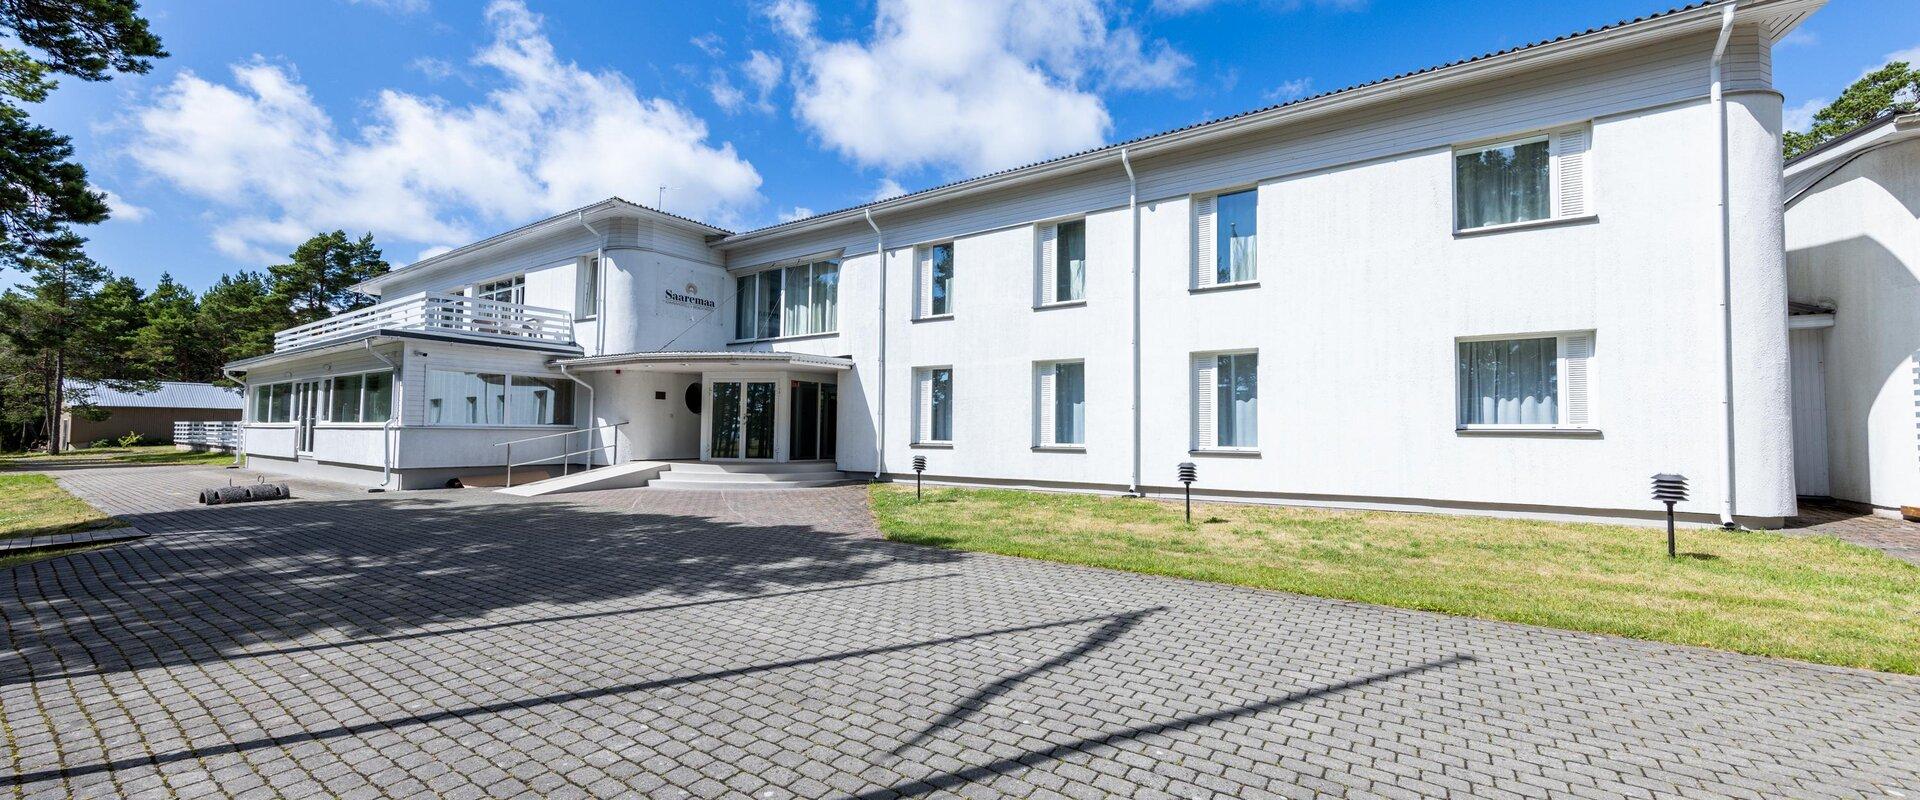 Located in Mändjala, away from the hustle and bustle of the city, the Saaremaa Beach Hotel is like a little pearl by the sea. We offer accommodation i